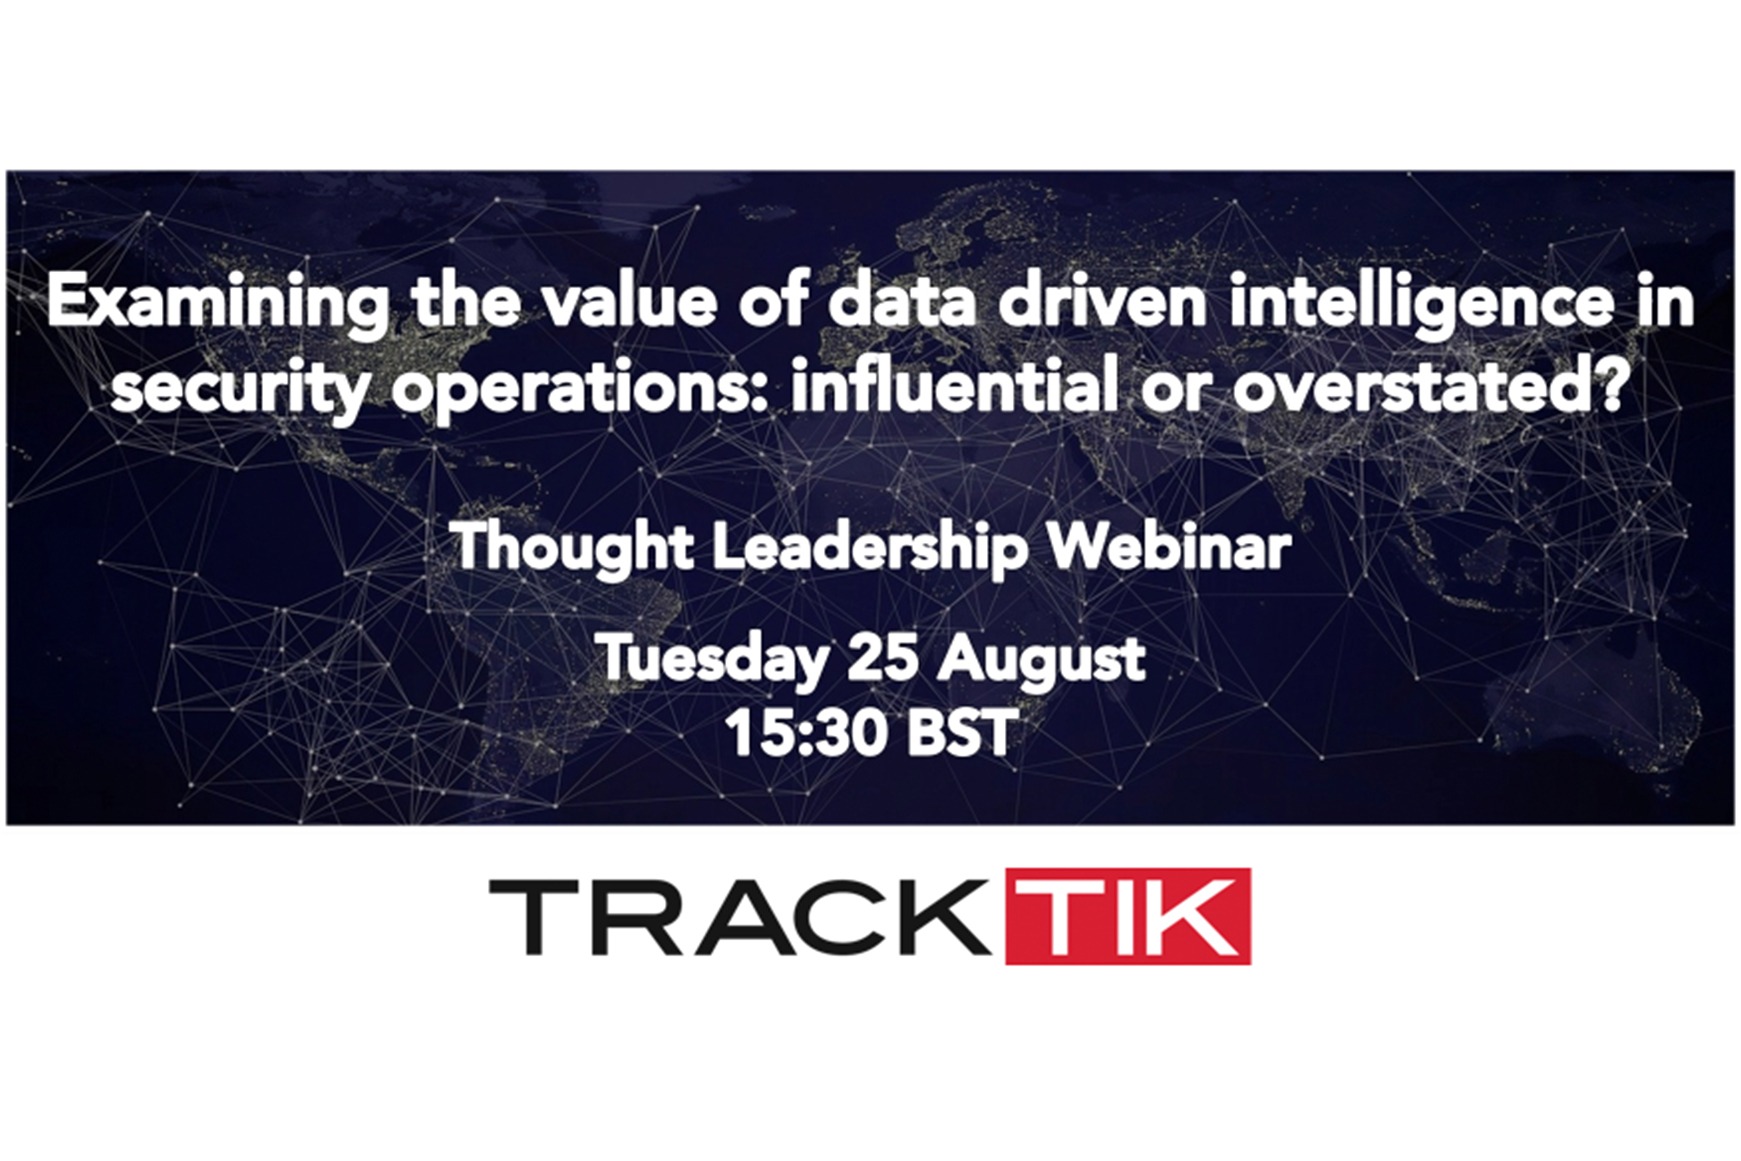 Examining the Value of Data Driven Intelligence in Security Operations: Influential or Overstated?